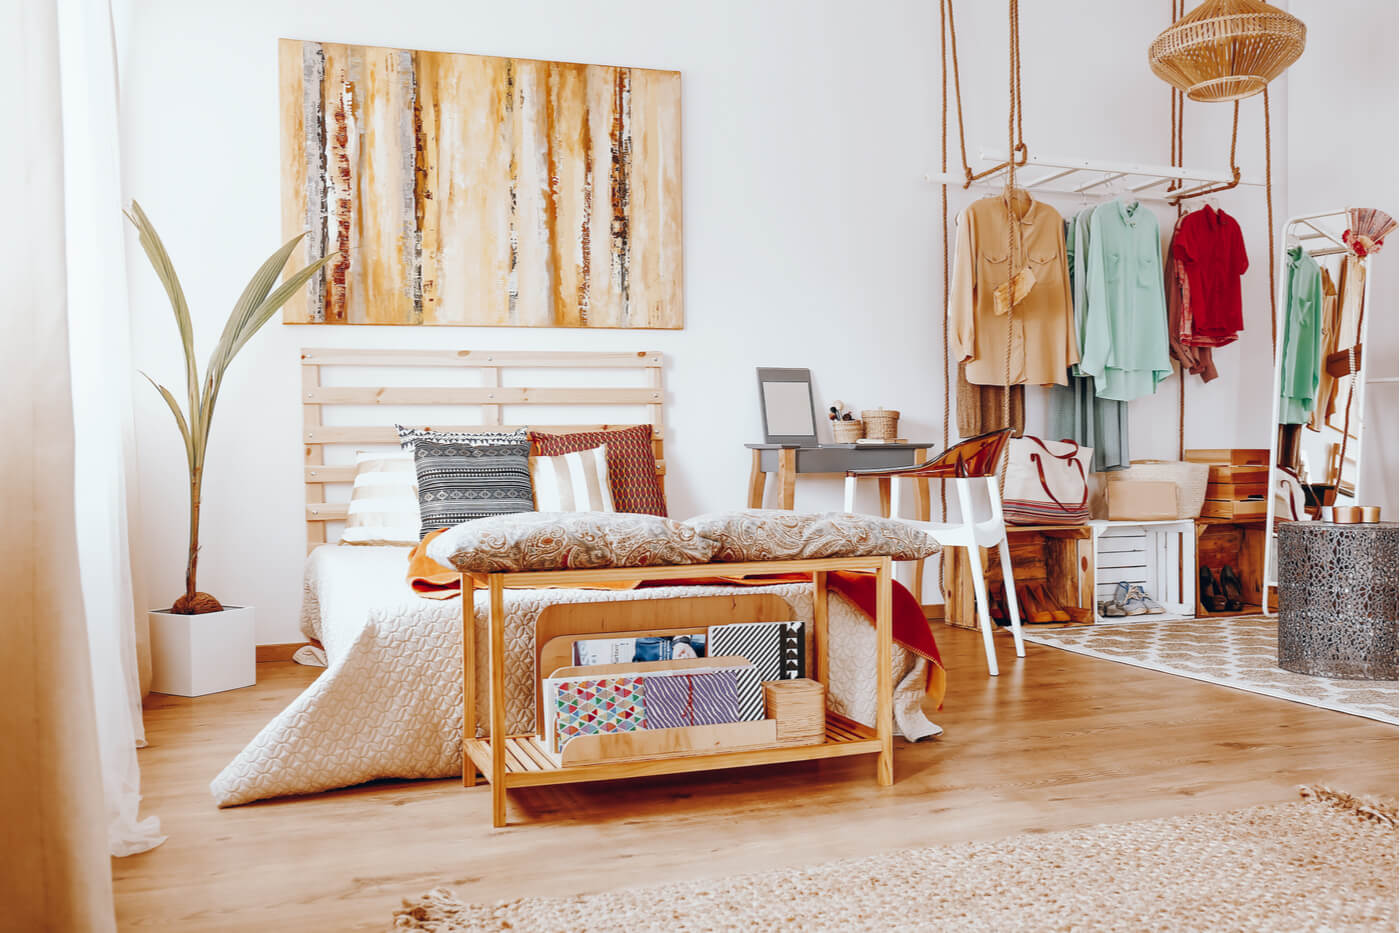 These are the keys to getting a bohemian bedroom